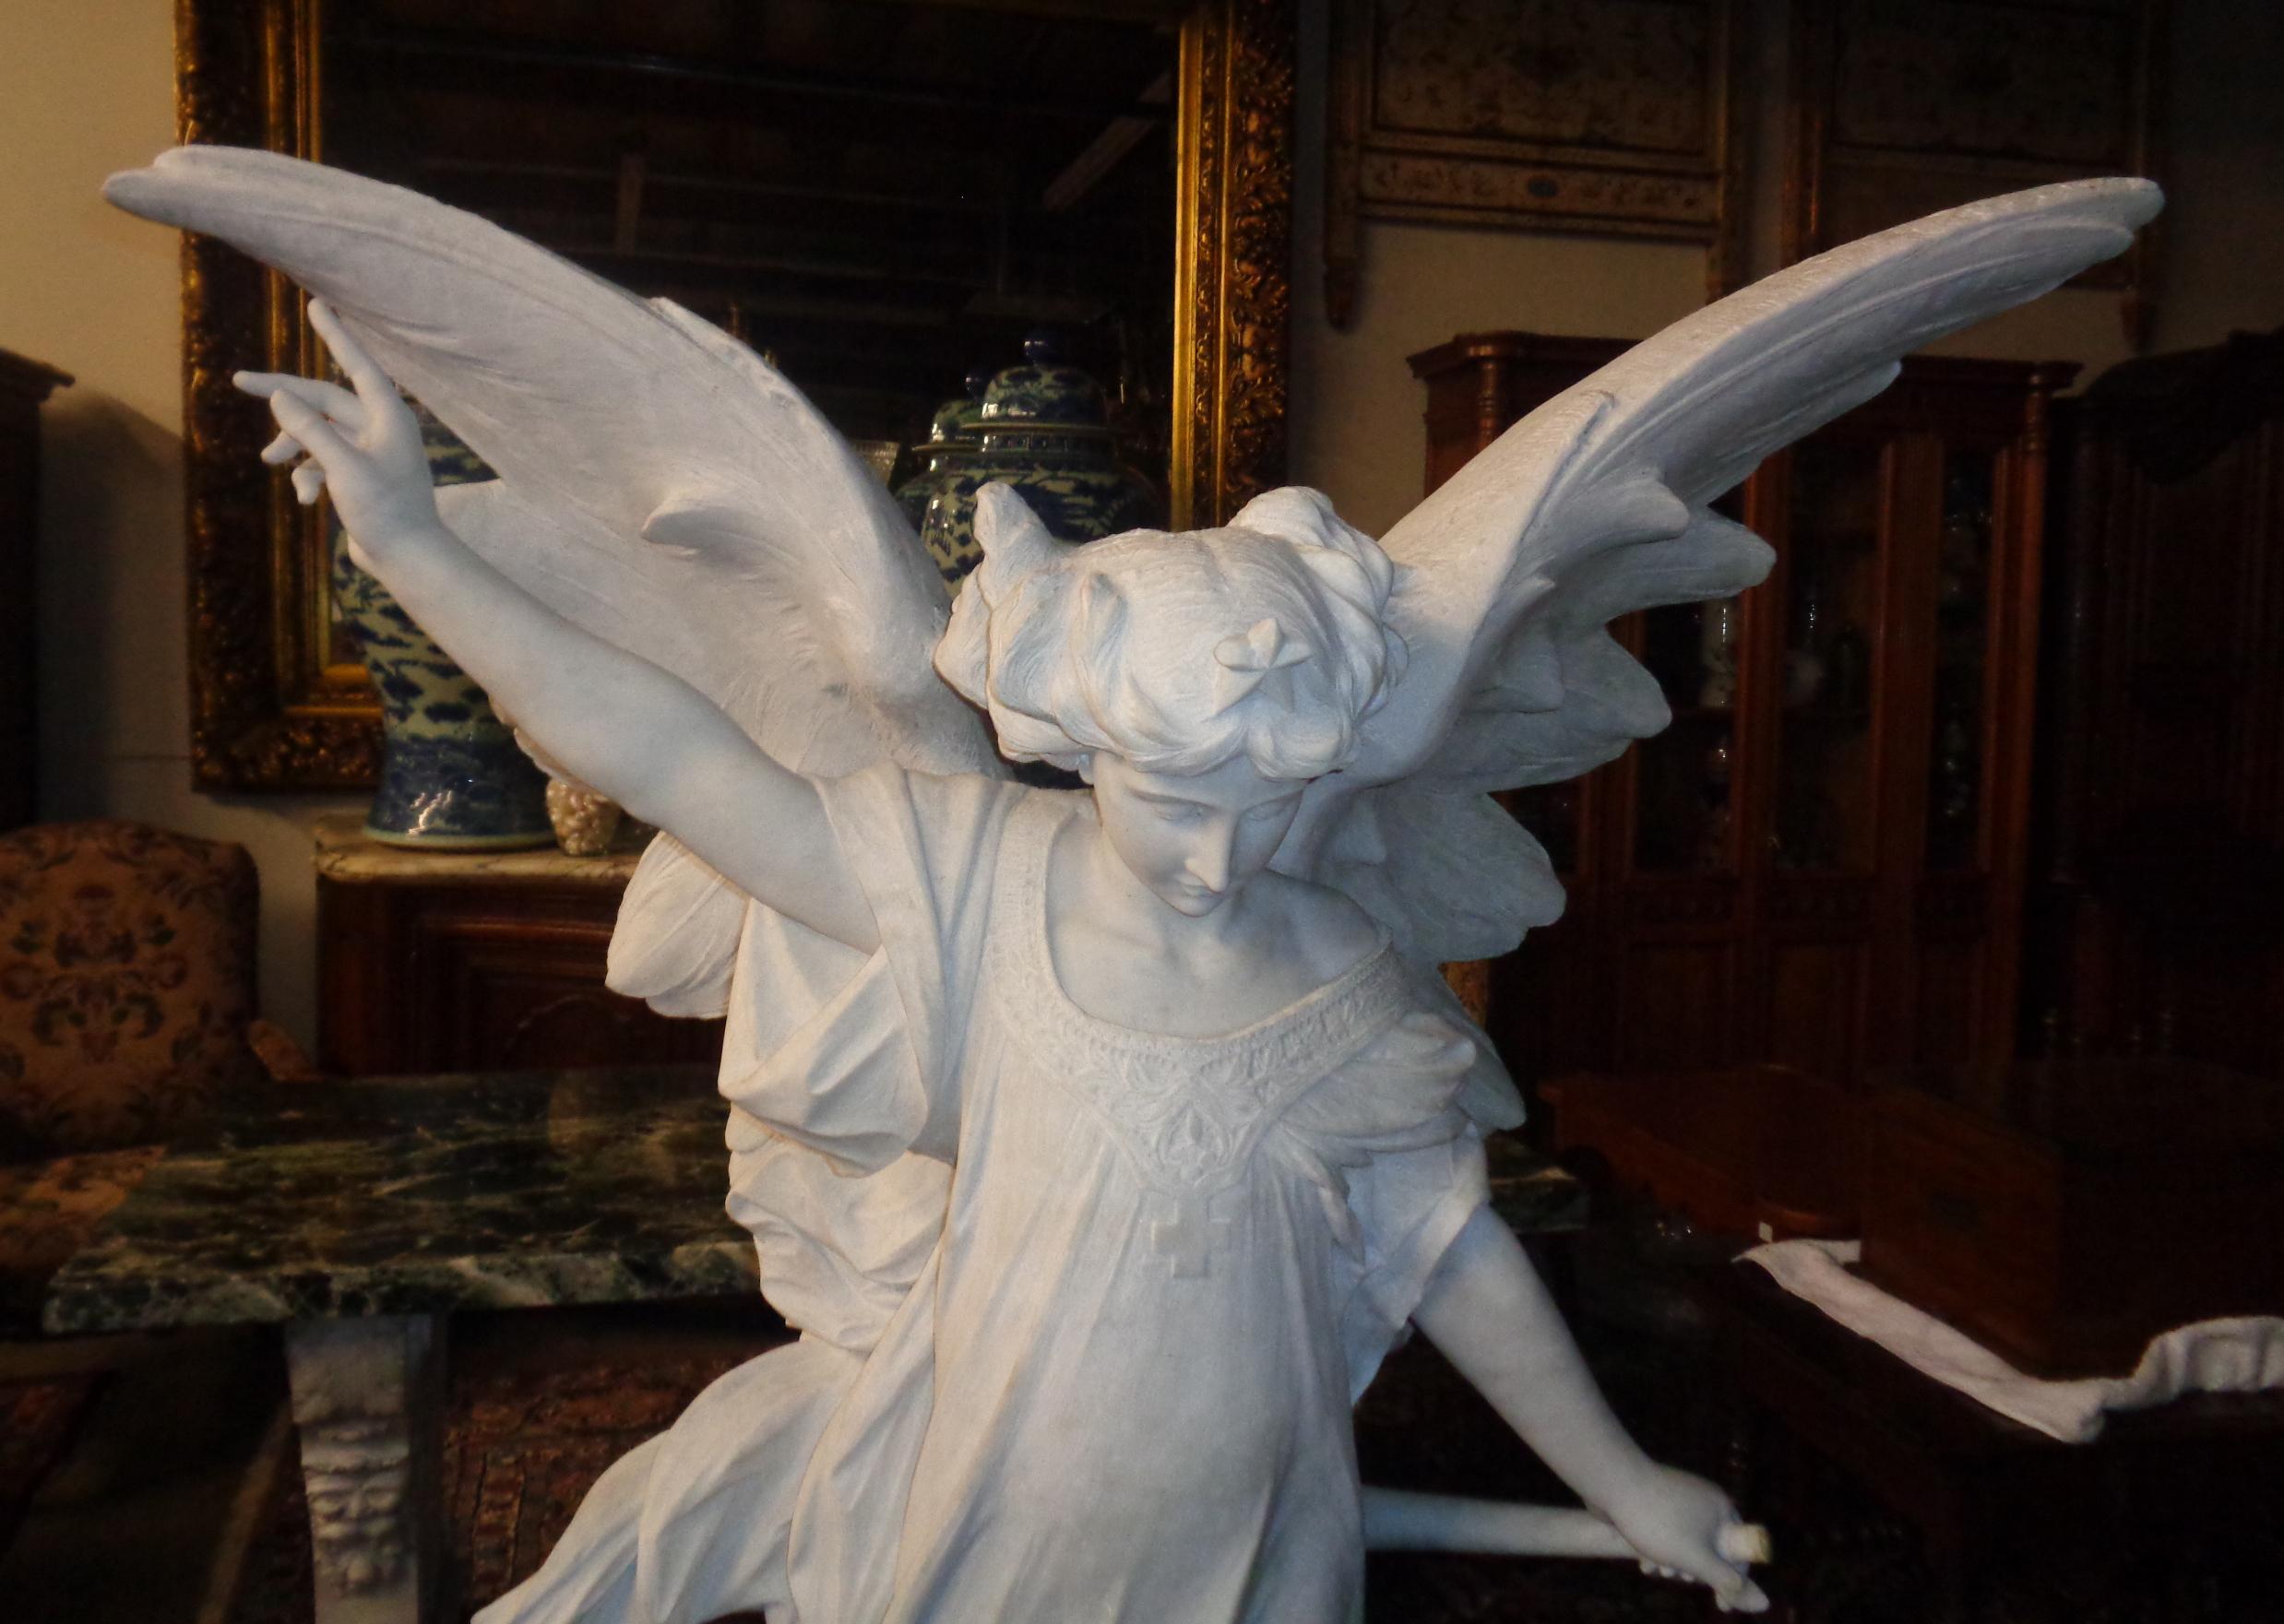 Magnificent life-size Italian Carrara marble sculpture of a winged angel standing on a cloud atop a rectangular base. The right hand is pointing to the heavens and the left hand is holding a trumpet. The angel is carved from a single block of